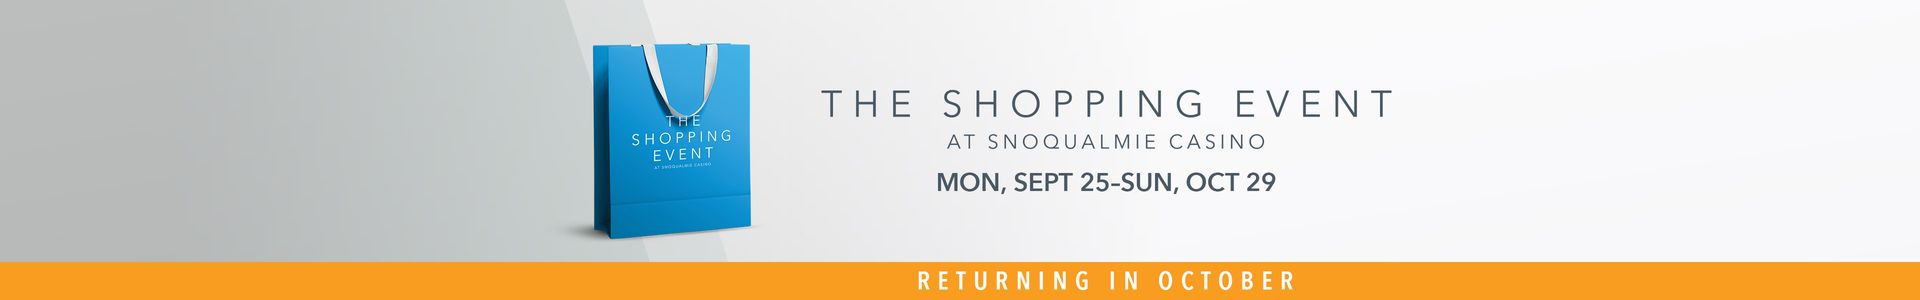 The Shopping Event